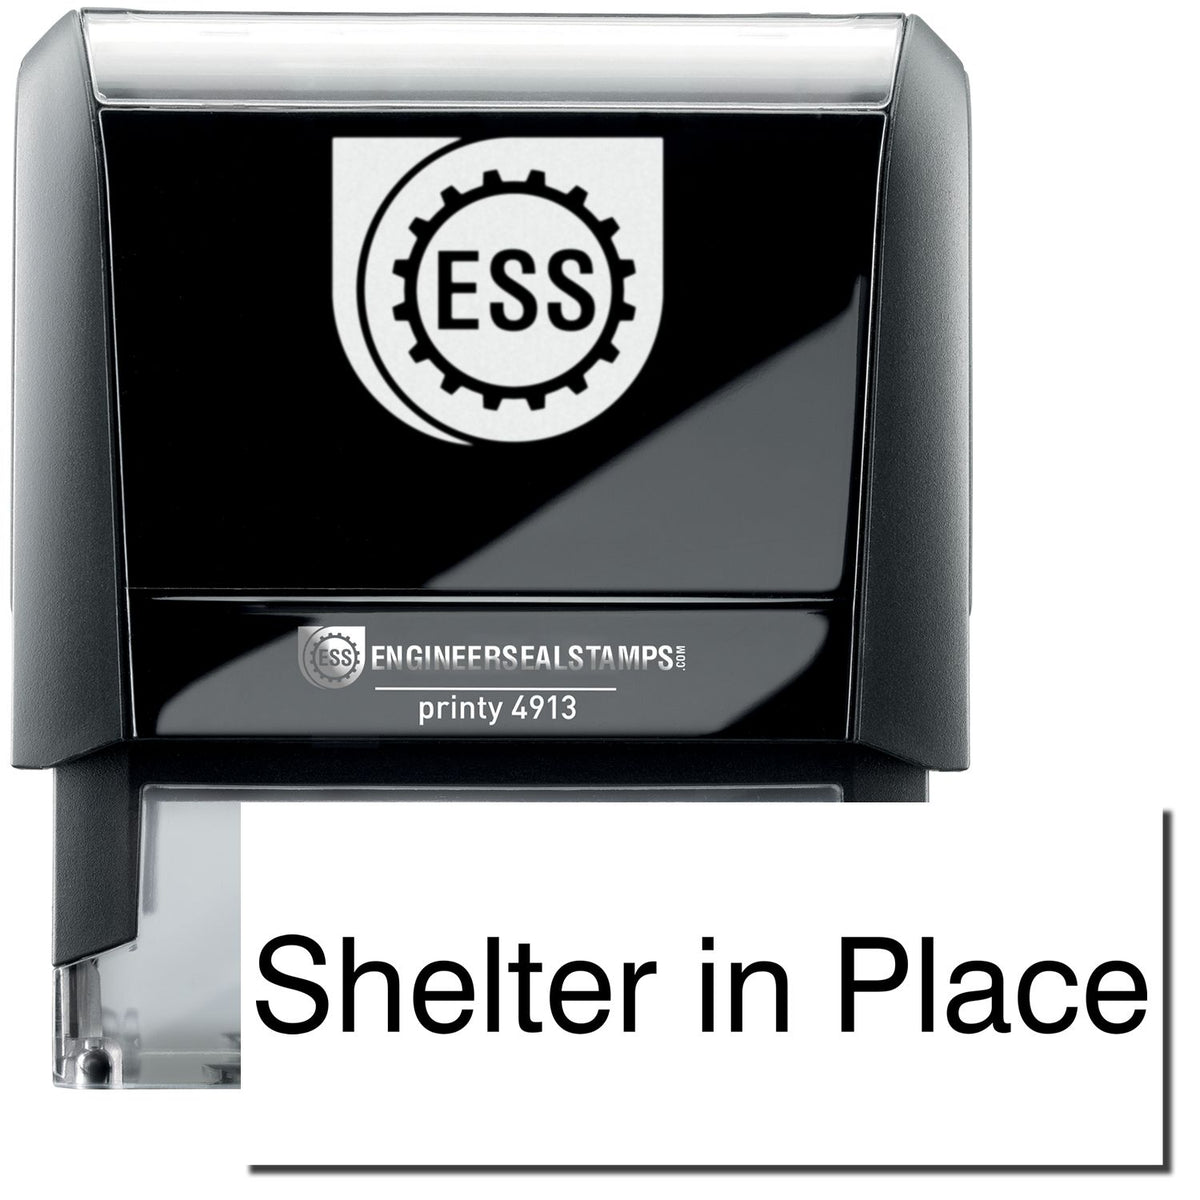 A self-inking stamp with a stamped image showing how the text &quot;Shelter in Place&quot; in a large font is displayed by it after stamping.